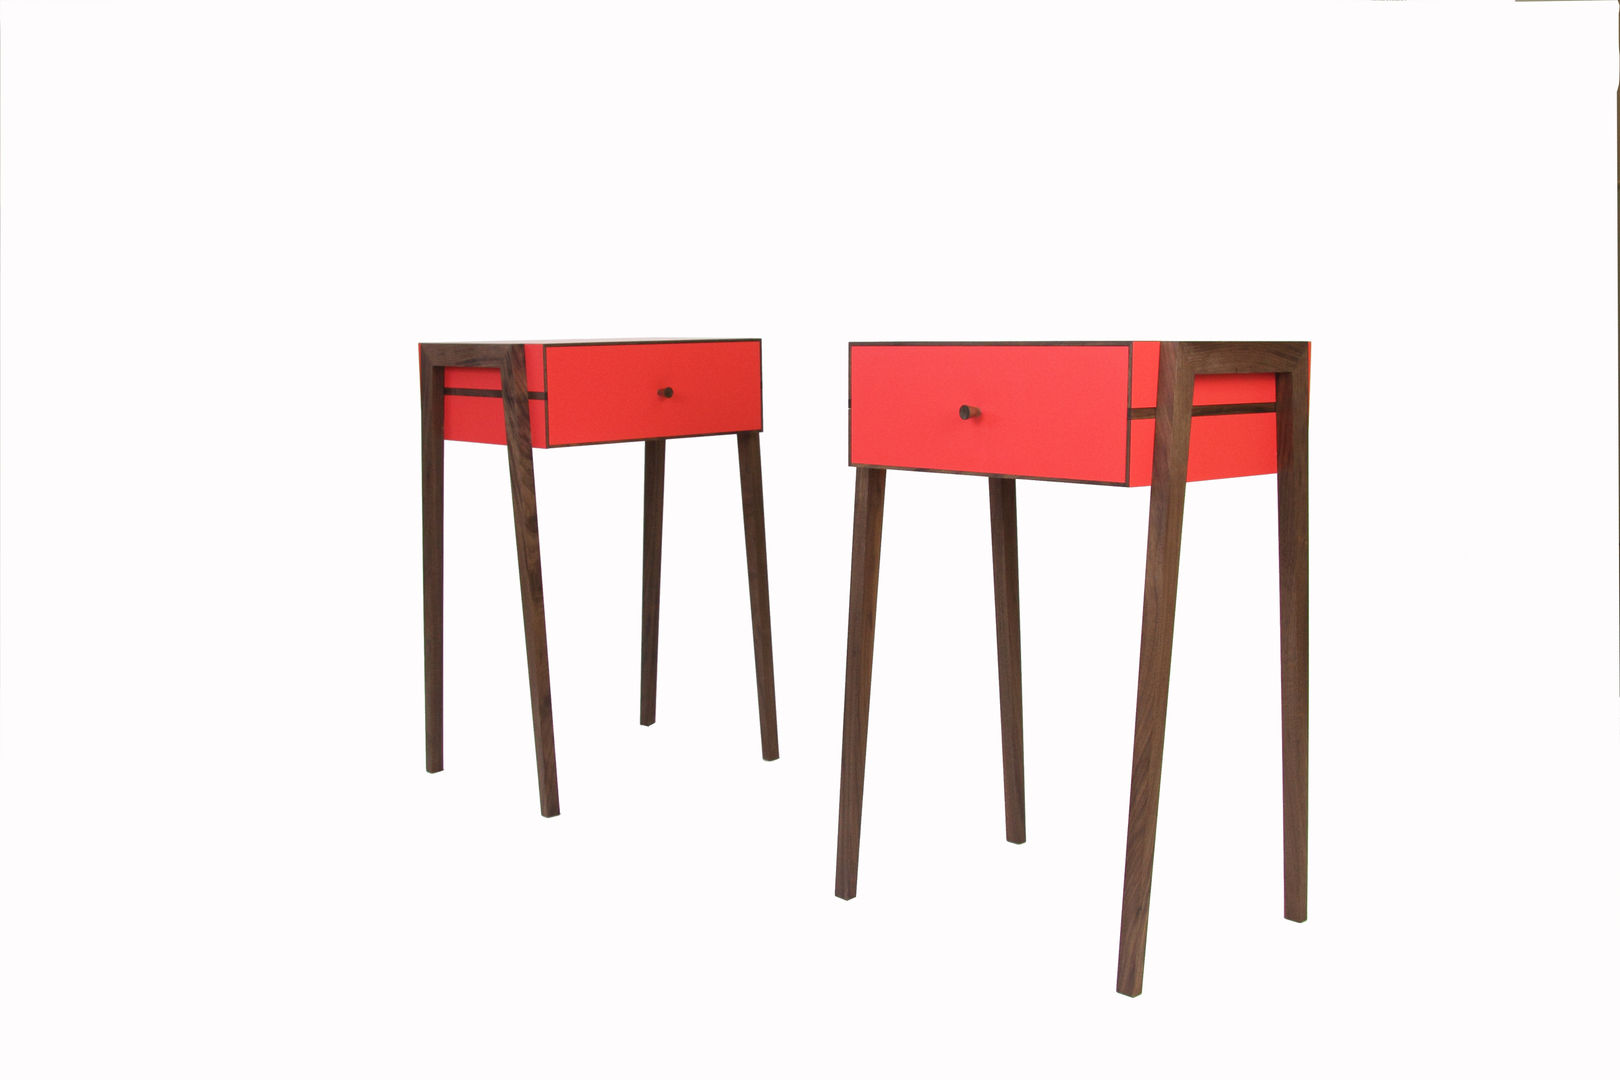 Animate Bedside Table in Red Formica and Walnut Young & Norgate モダンスタイルの寝室 ベッドサイドテーブル